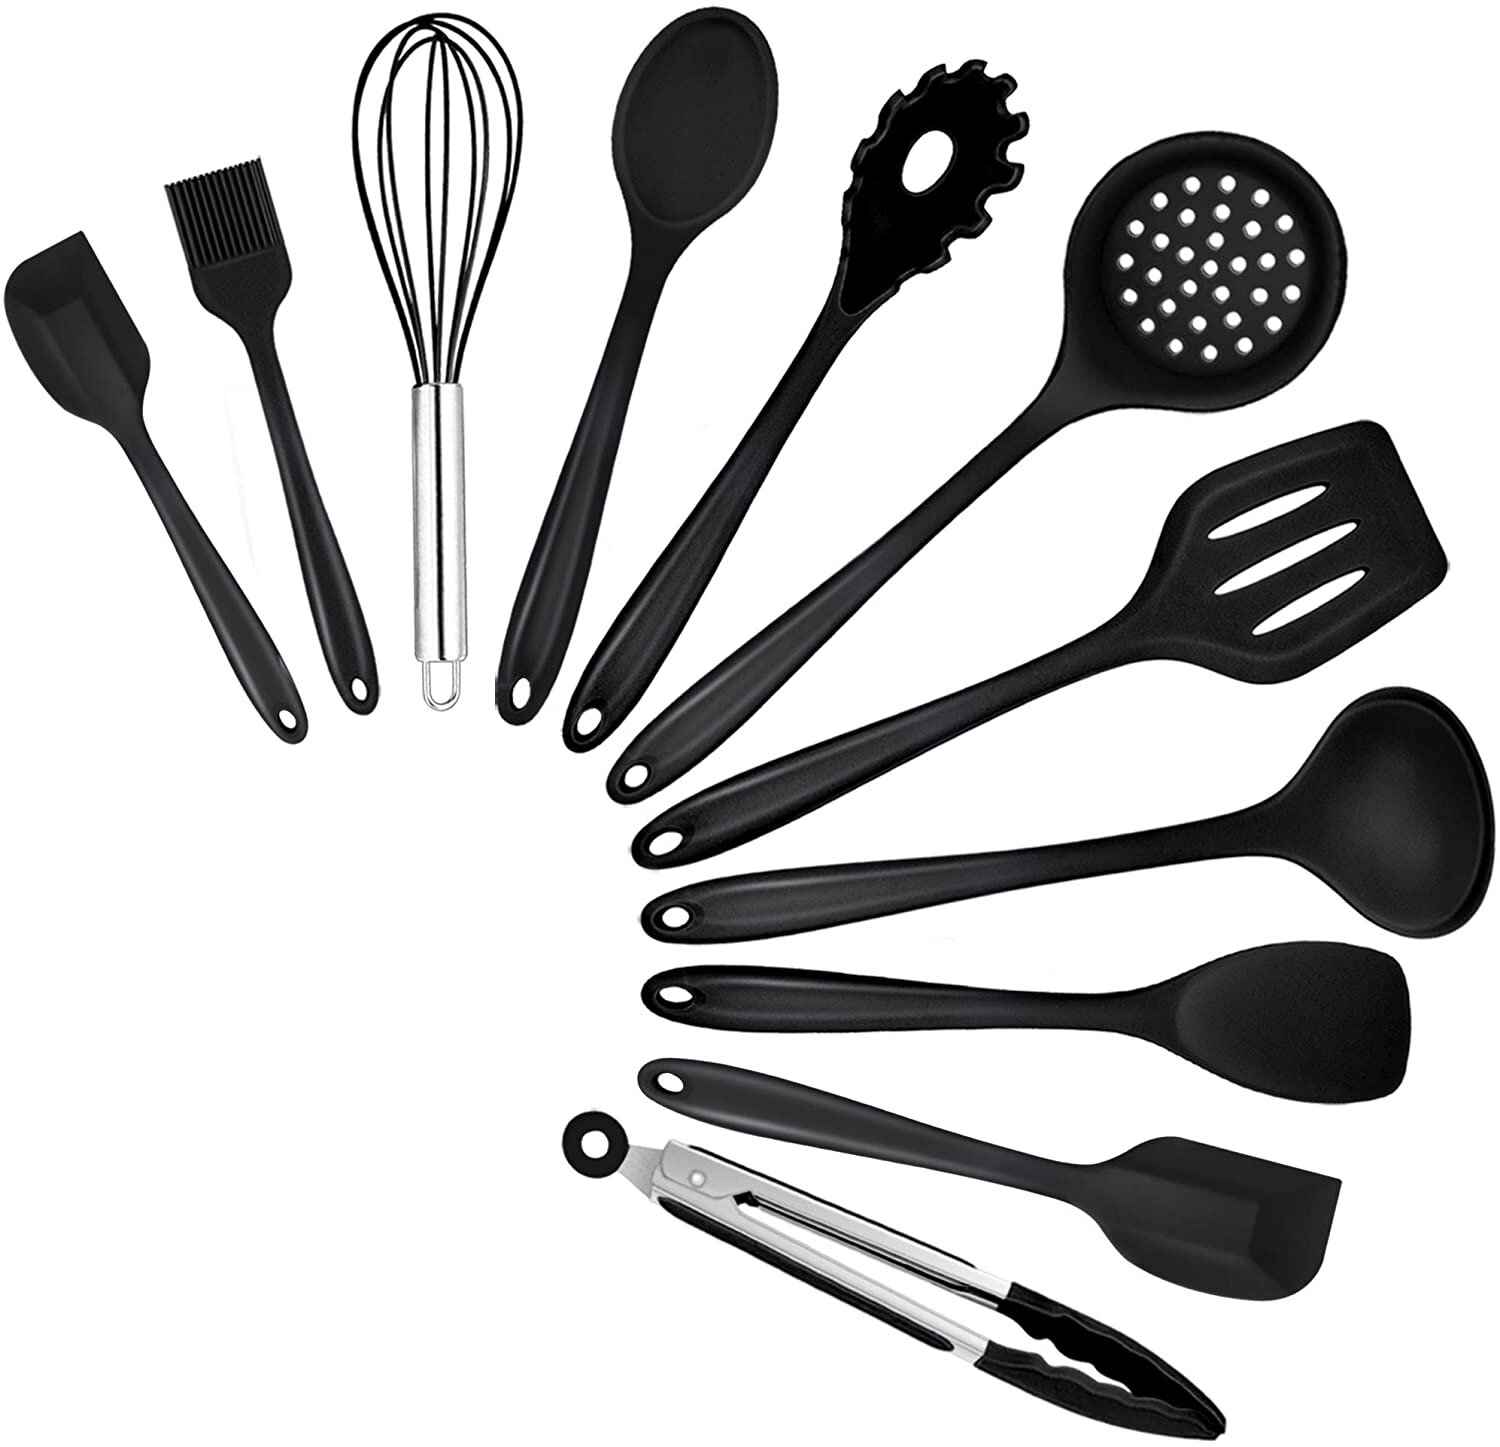 Baking and Mixing Non-Stick Silicone Kitchen Utensils with Stainless Steel Core for Cooking Silicone Spatula Green